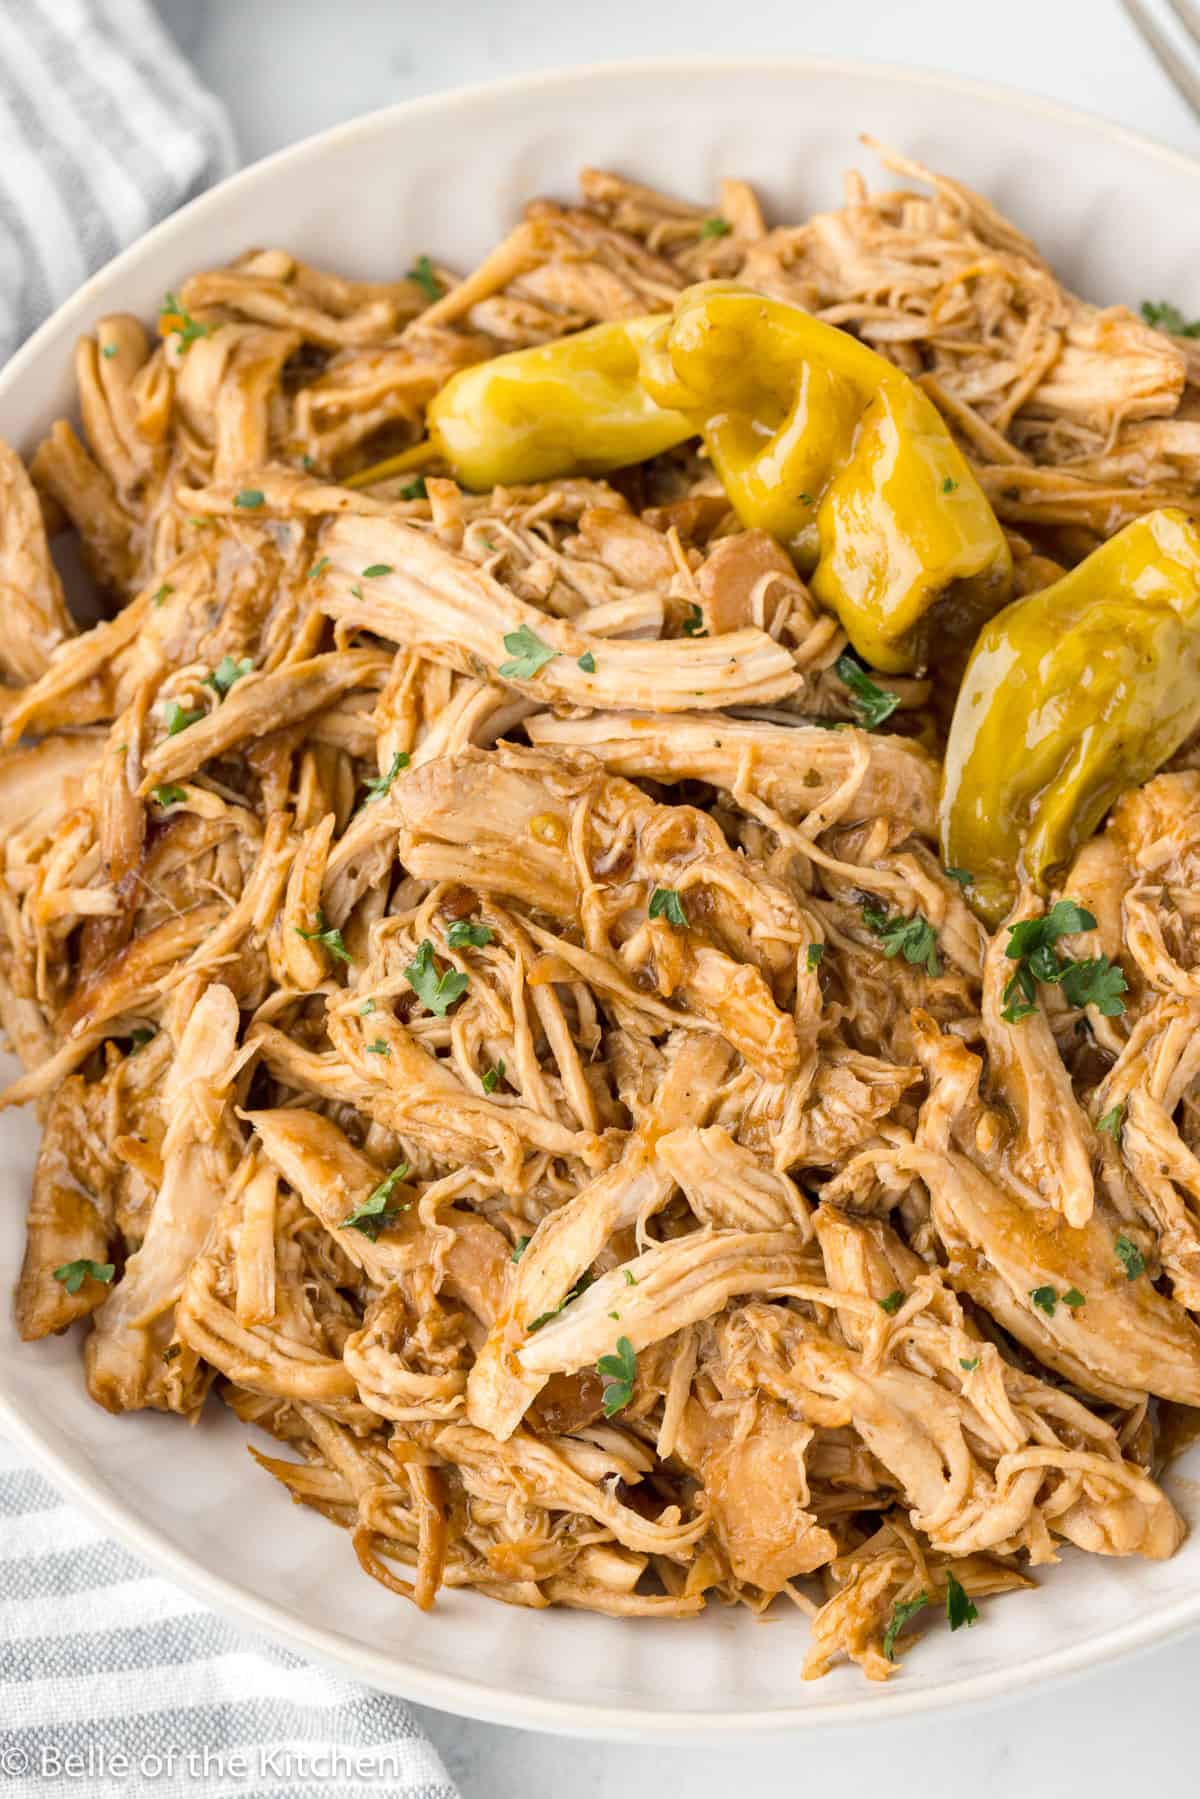 shredded chicken and peperoncini peppers.